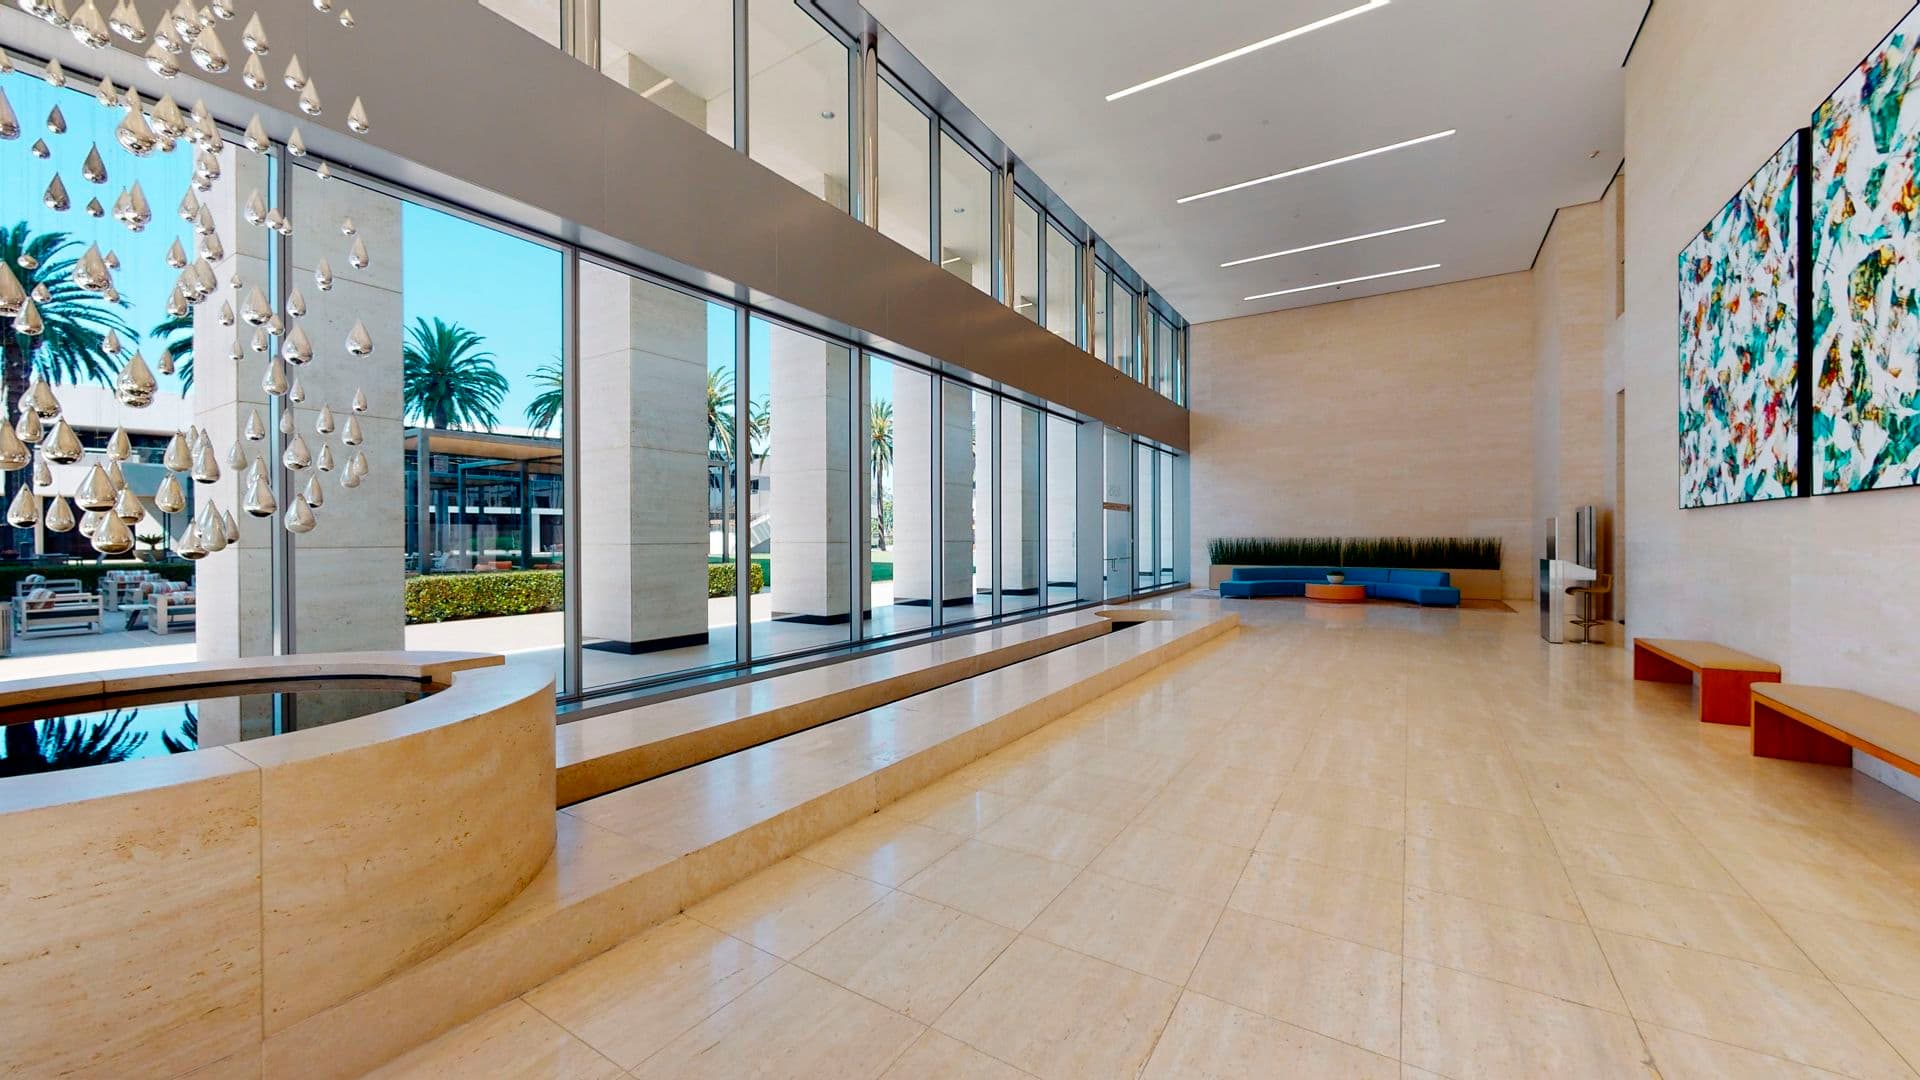 Interior photography of the Lobby at 4695 MacArthur Court in Newport Beach, CA.